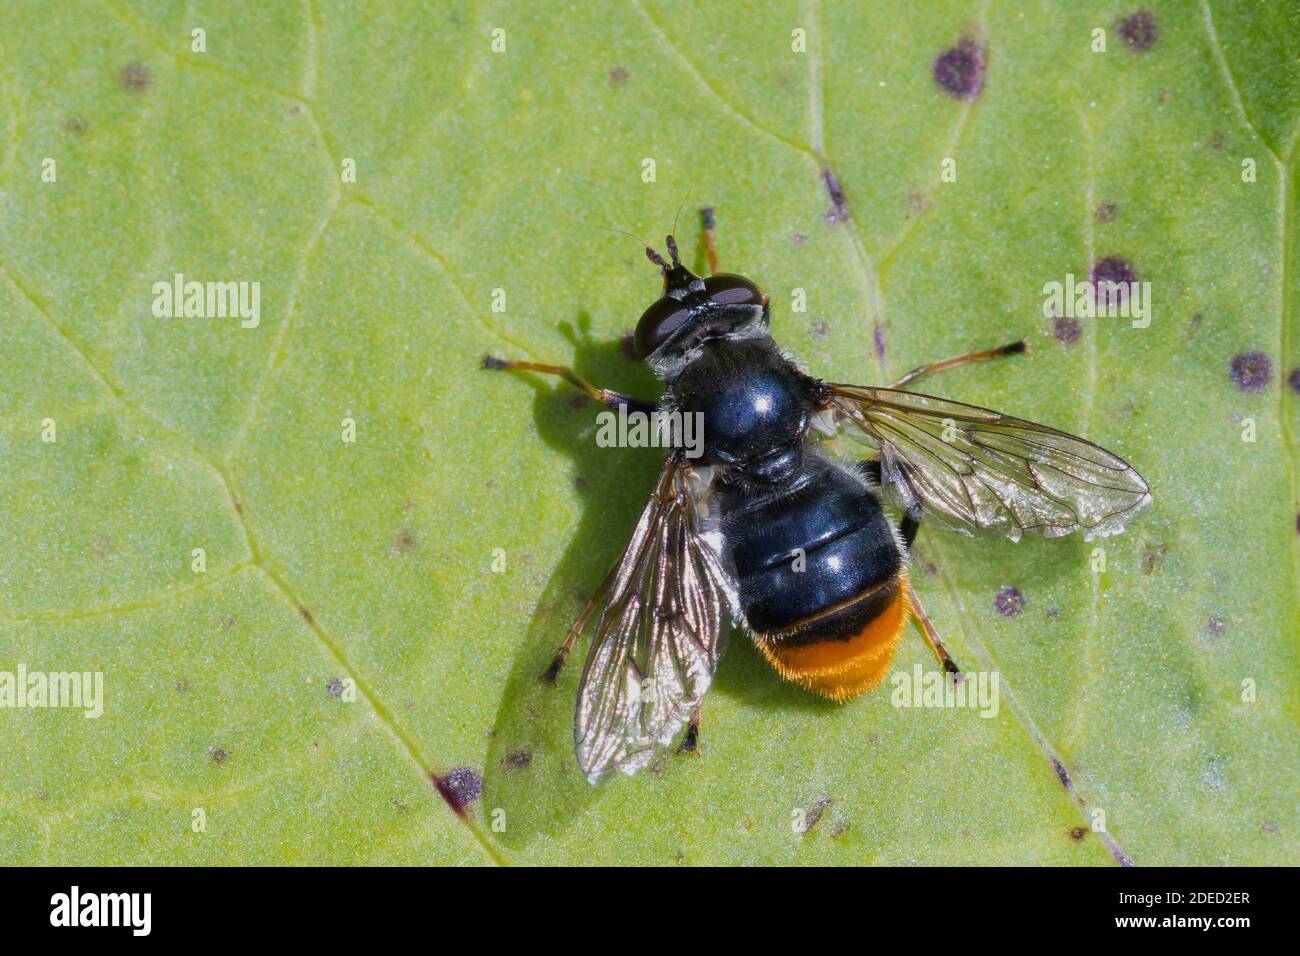 Pine Hoverfly (Blera fallax), sitting on a leaf, dorsal view, Germany Stock Photo